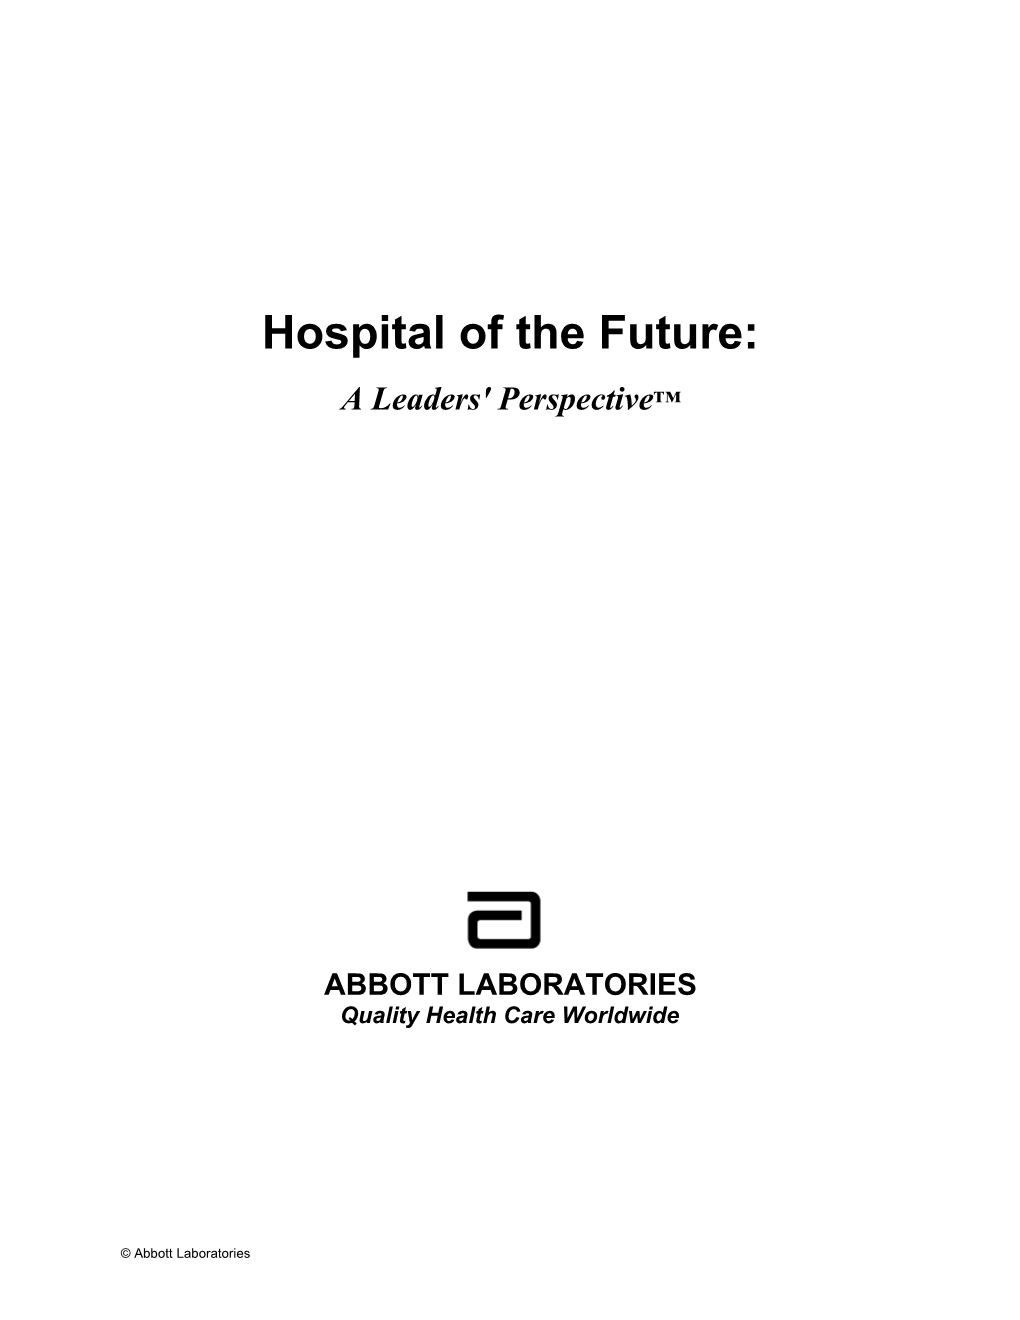 Hospital of the Future: a Leaders' Perspective